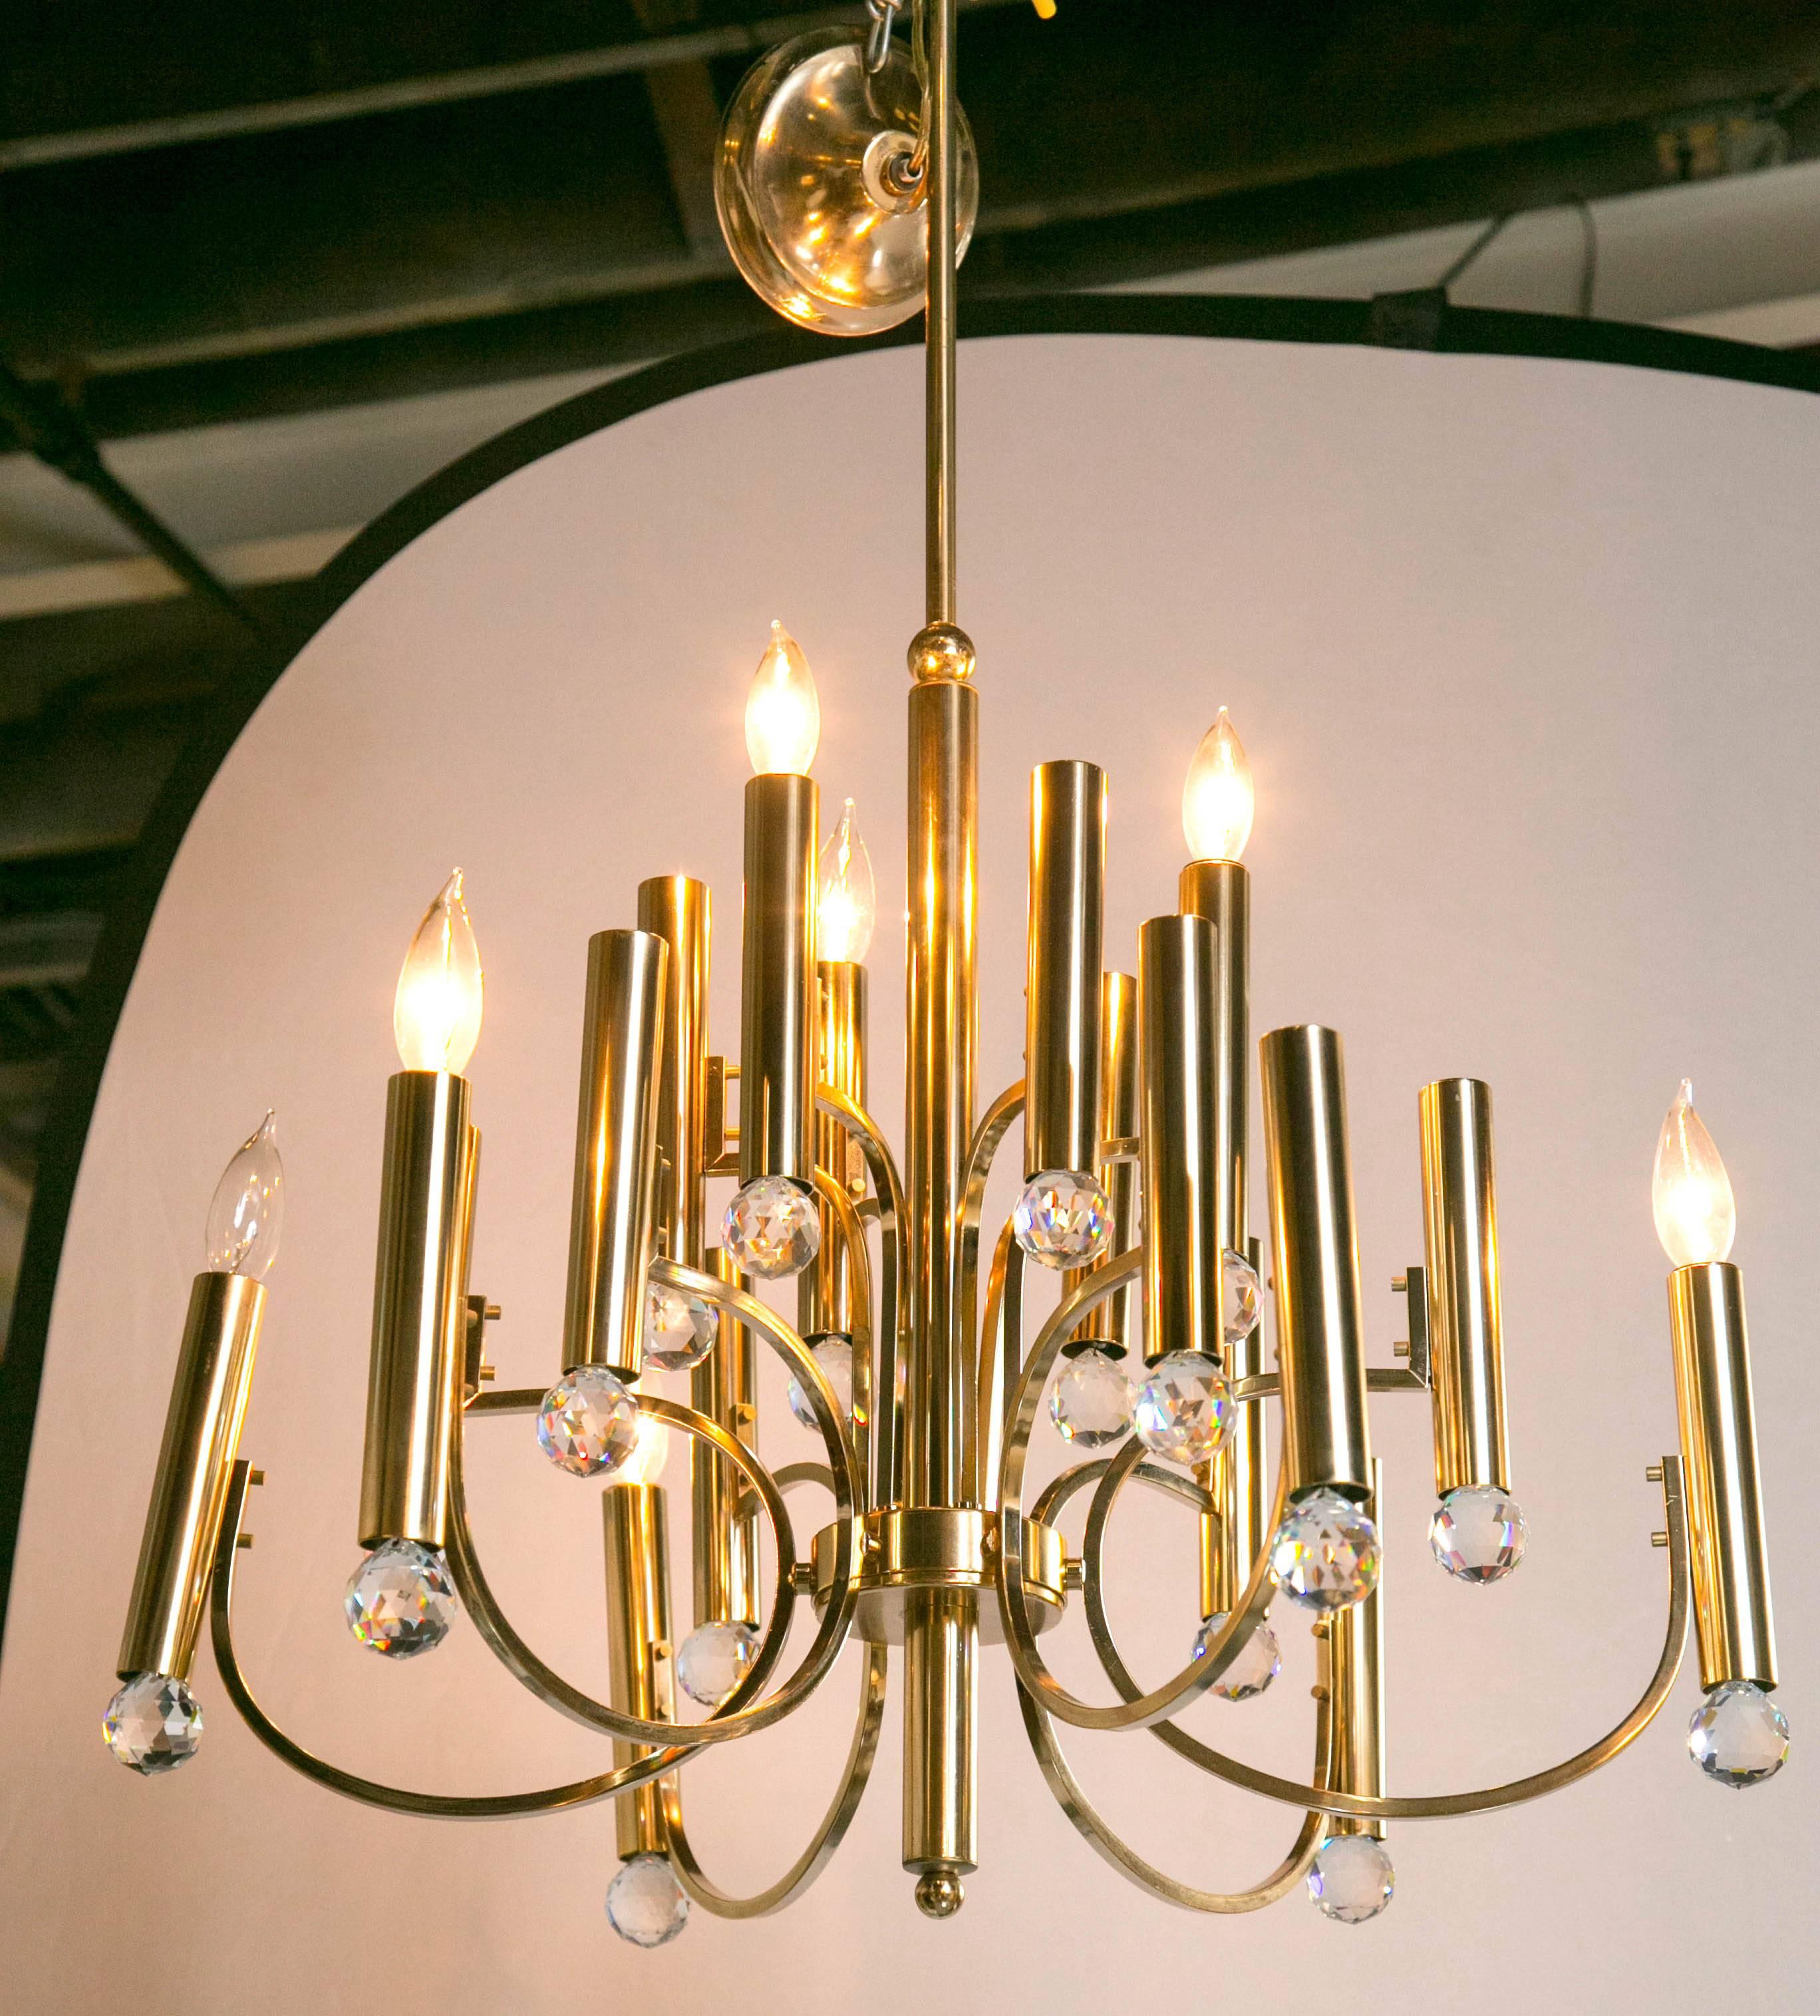 Parzinger Style Chandelier with Swarovski Crystal Prisms. This Tommi Parzinger inspired chandelier is solid brass having 18 lights supported by flowing elegant arms. A fine representation of the Hollywood Regency era. 